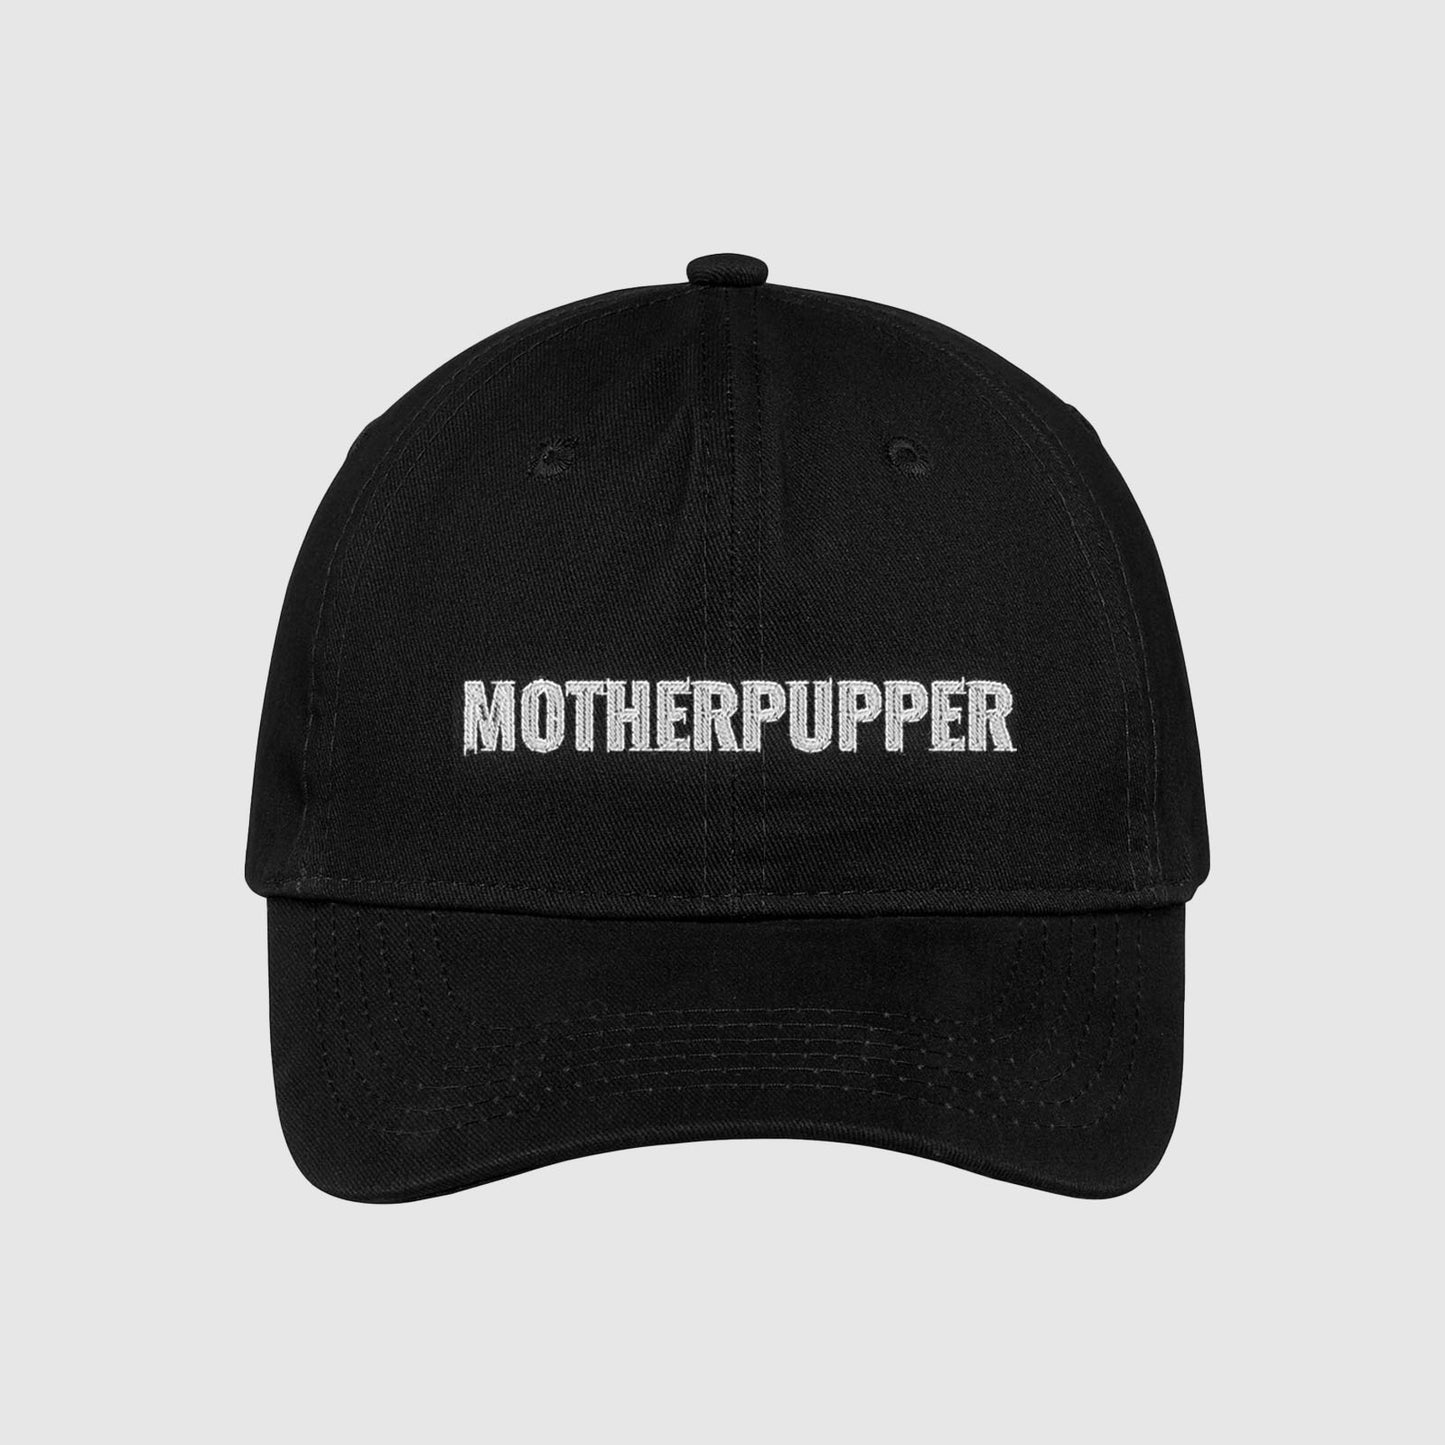 Black Mother Pupper dad Hat for dog moms embroidered with white text.